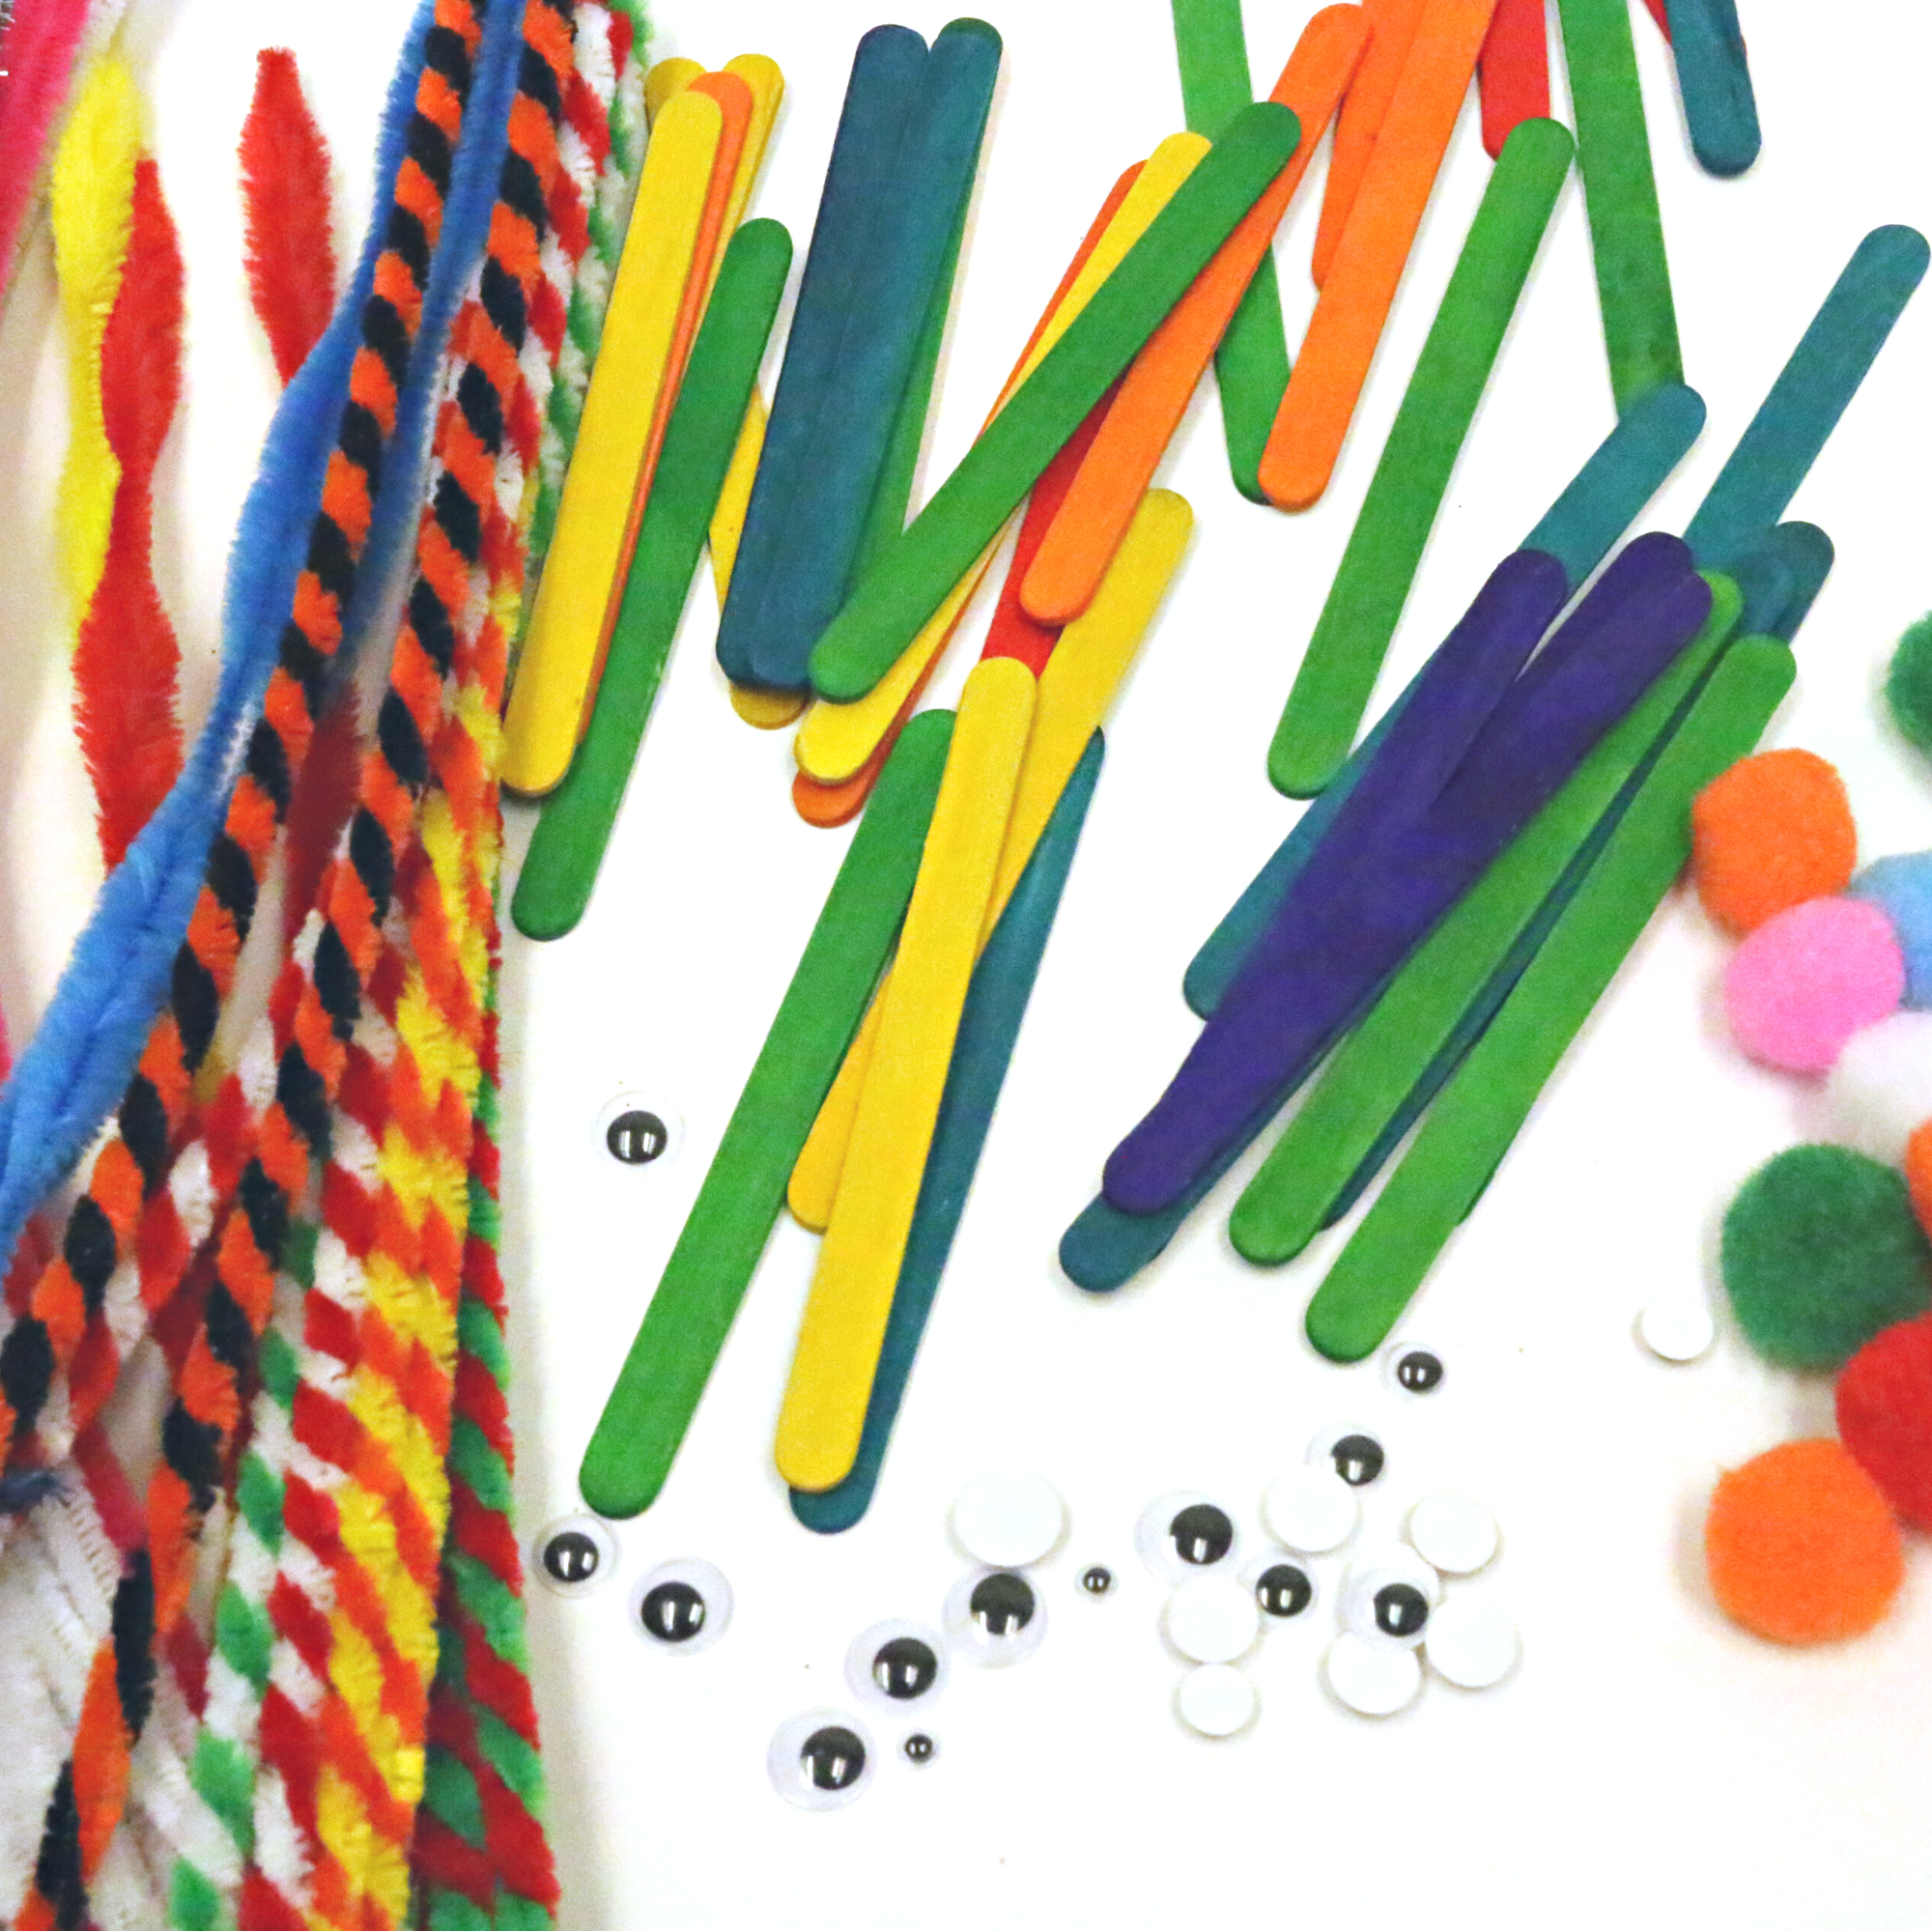 Bundooraking Pipe Cleaners, Pipe Cleaners Craft, Arts and Crafts